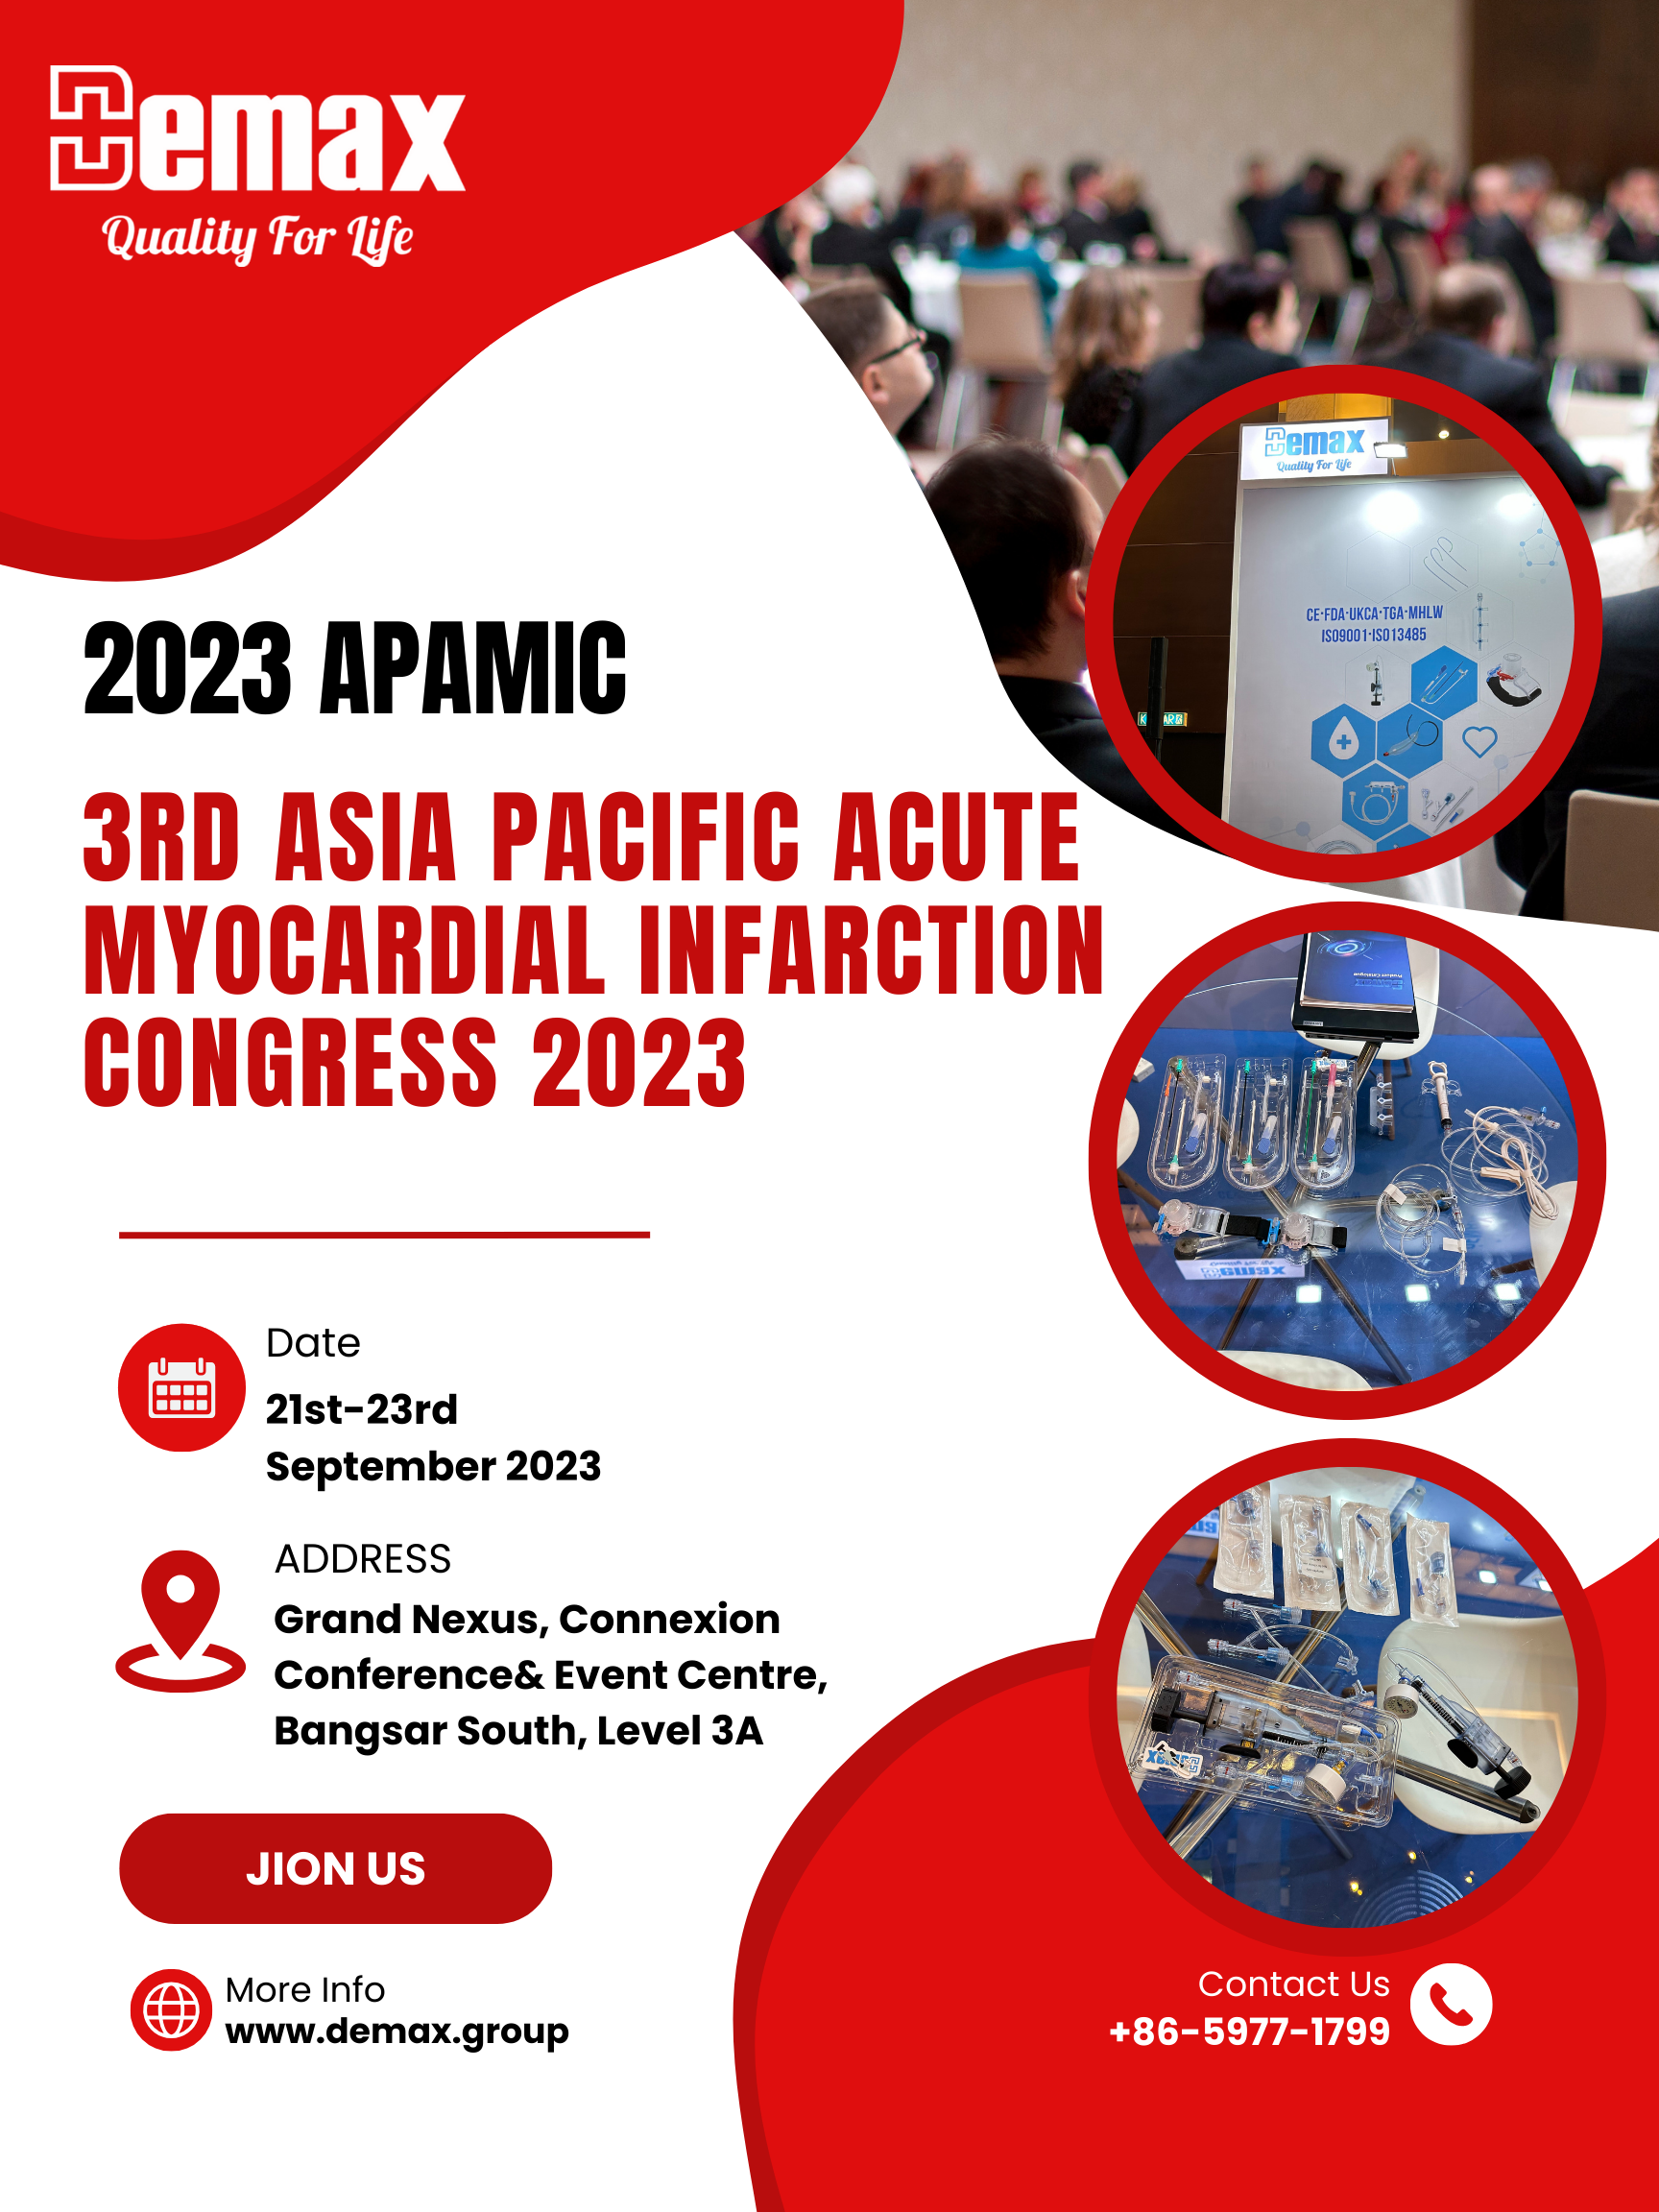 In progress! 2023 APAMIC Demax Medical sincerely looks forward to your visit